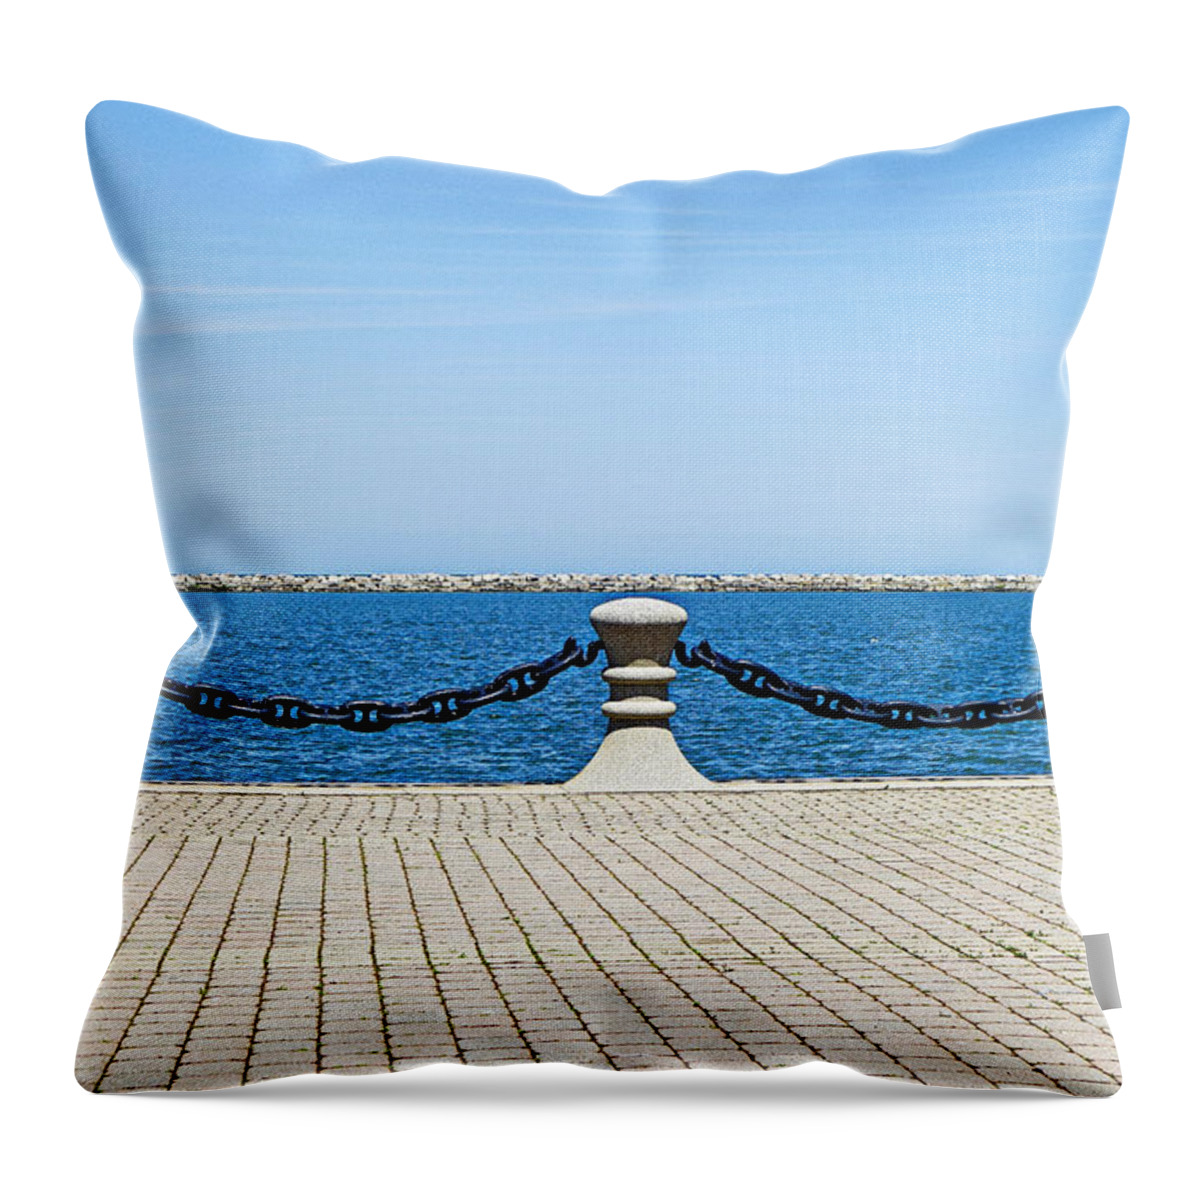 Cleveland Throw Pillow featuring the photograph Cleveland Harbor Chained by Robert Meyers-Lussier